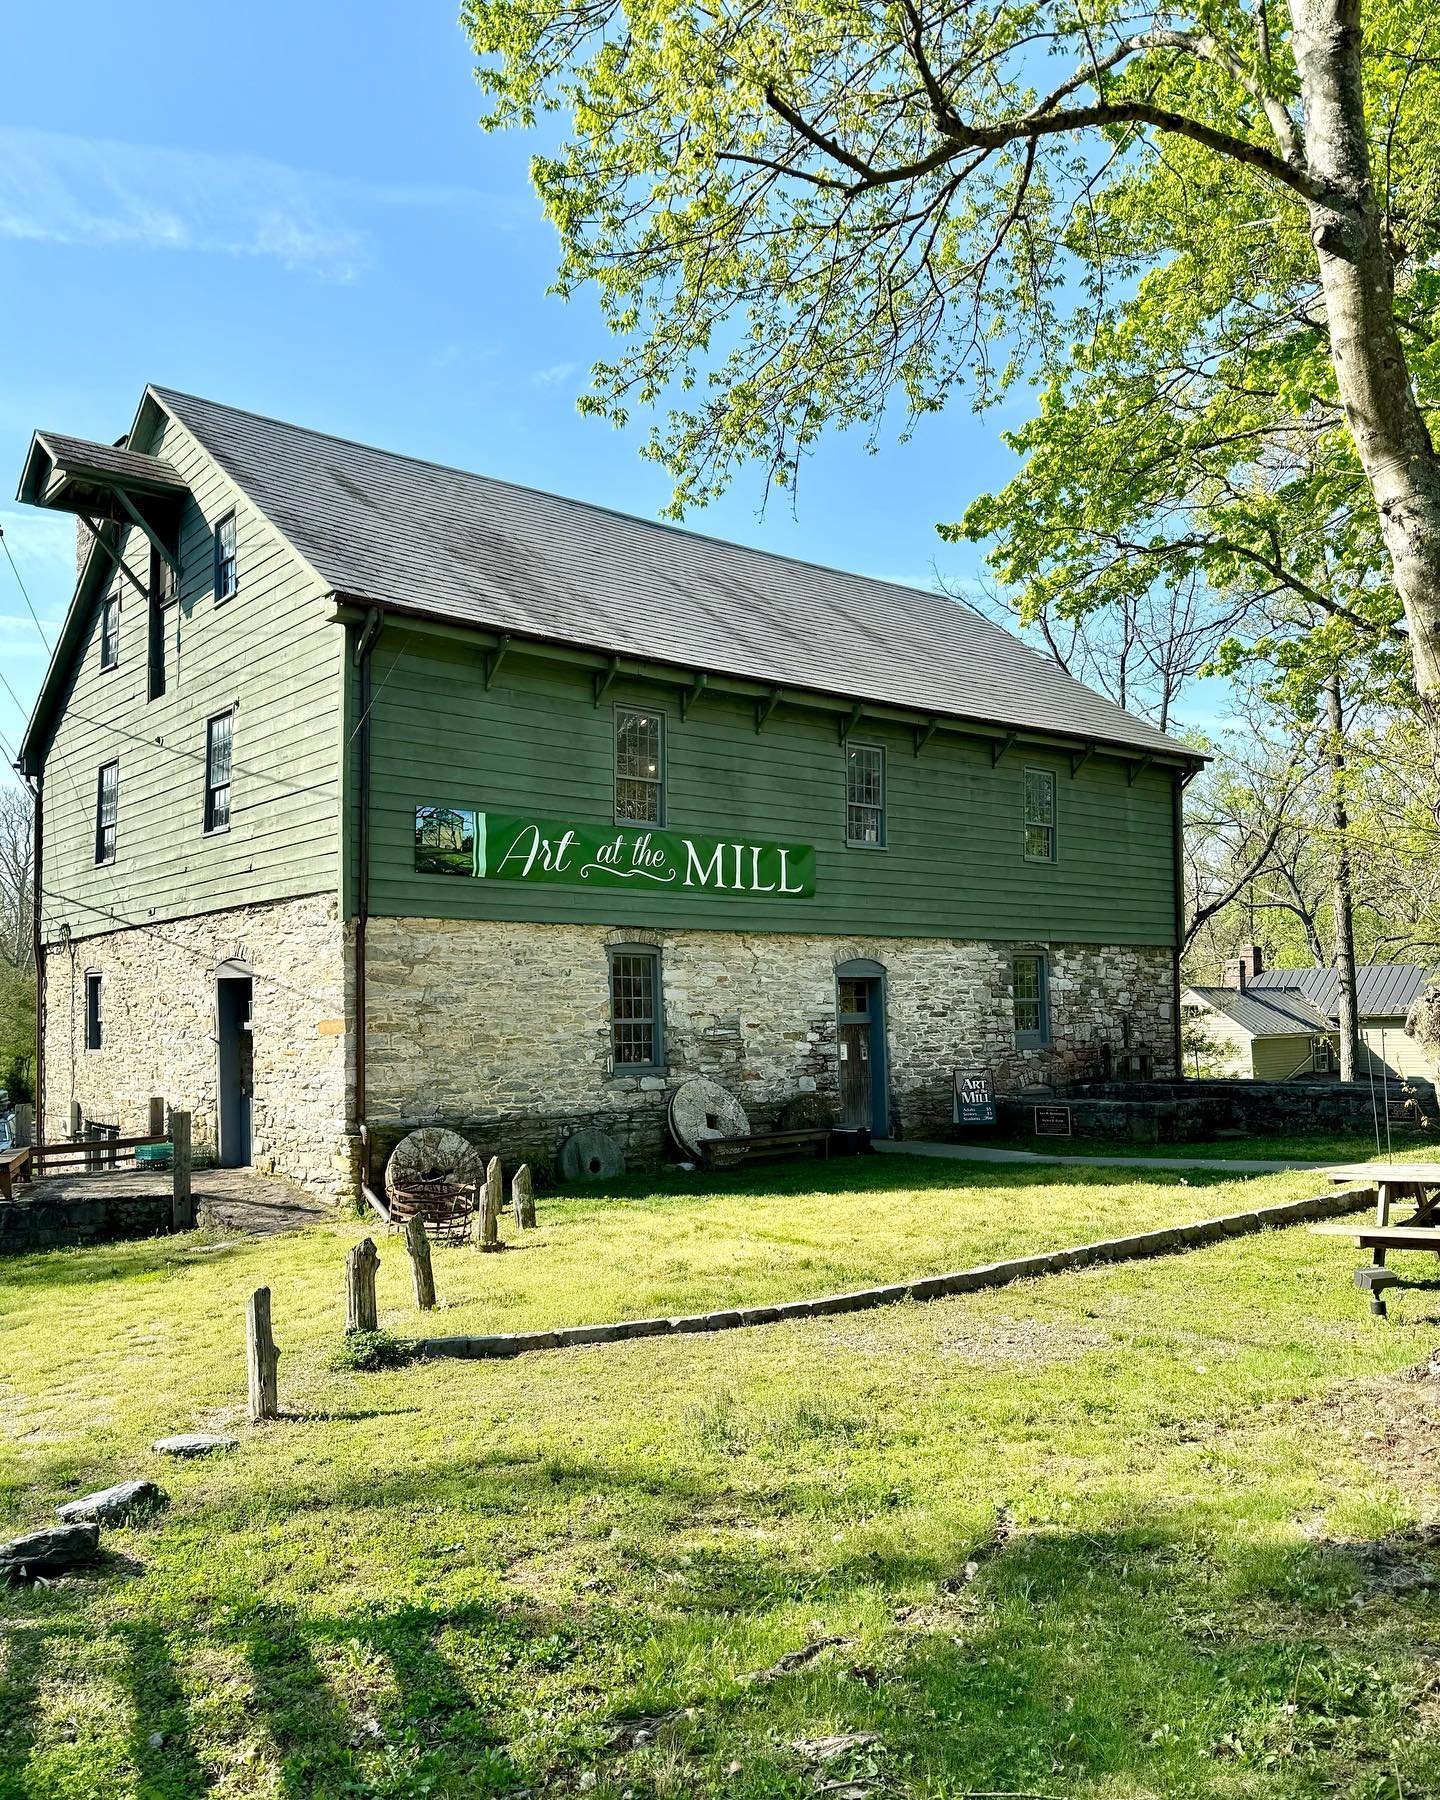 Today is the first day of Art at the Mill, and that means we&rsquo;re introducing our new store hours! Starting Monday, April 22, Locke Store will be open on Mondays (yes, ALL Mondays!) from 9am to 6pm. 

Art at the Mill takes place at the historic B